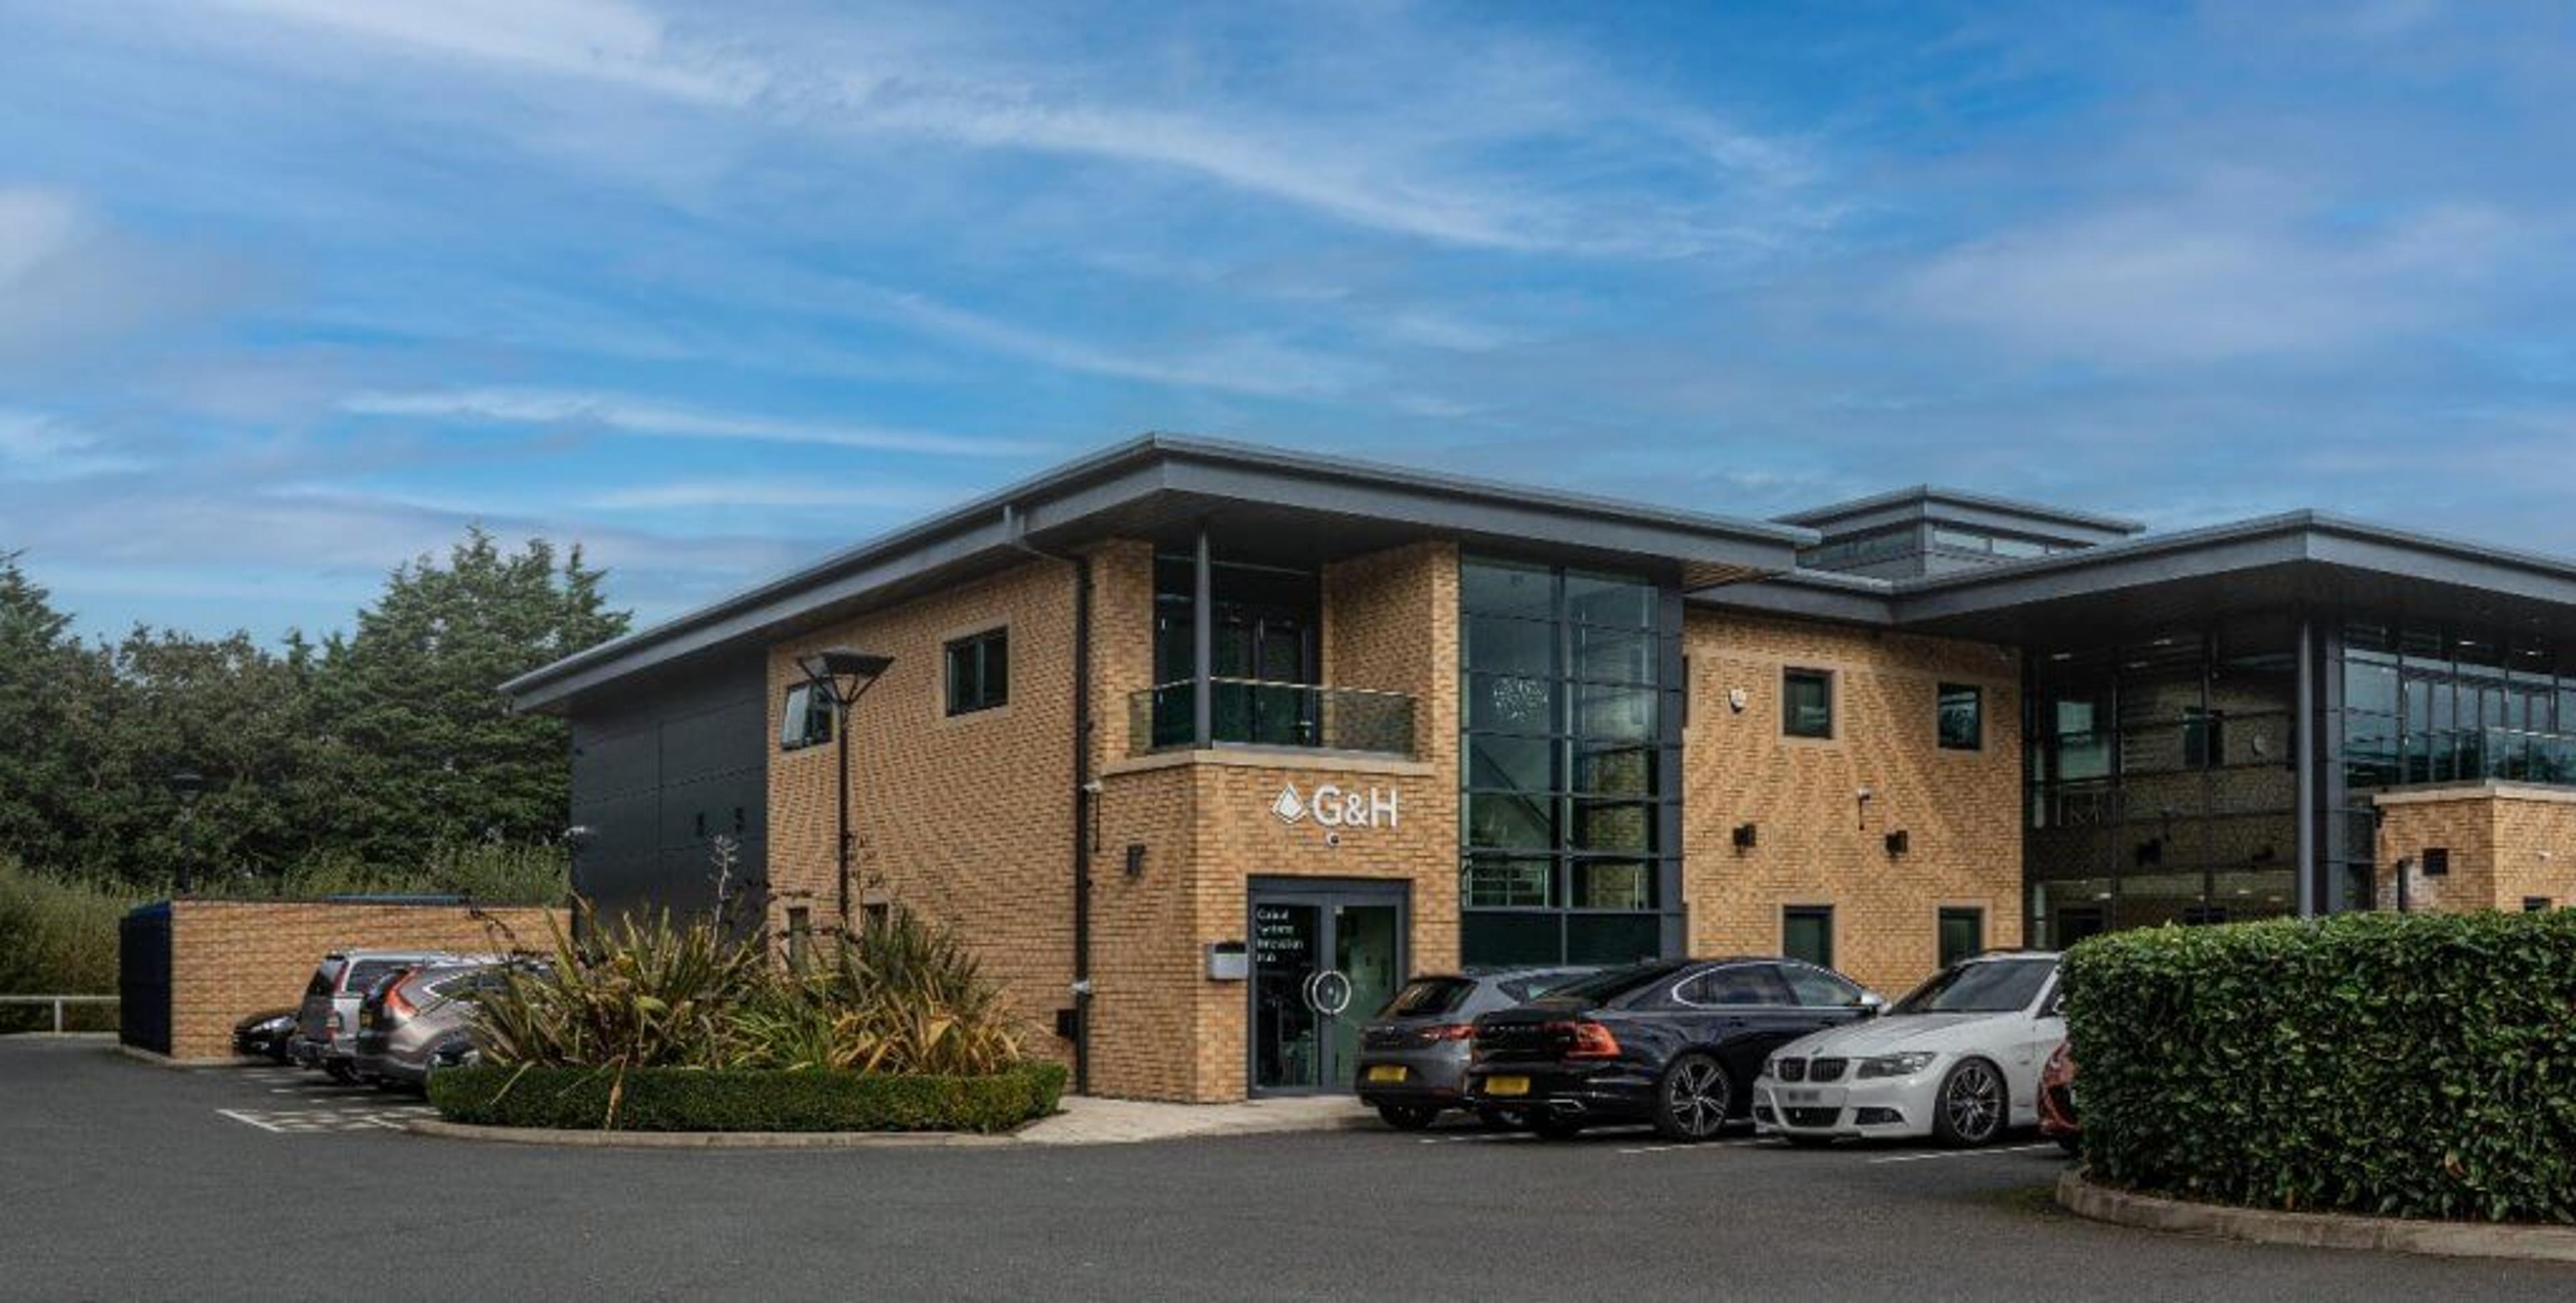 Brand new G&H facility in St Asaph, UK, housing the Optical Systems Innovation Hub.